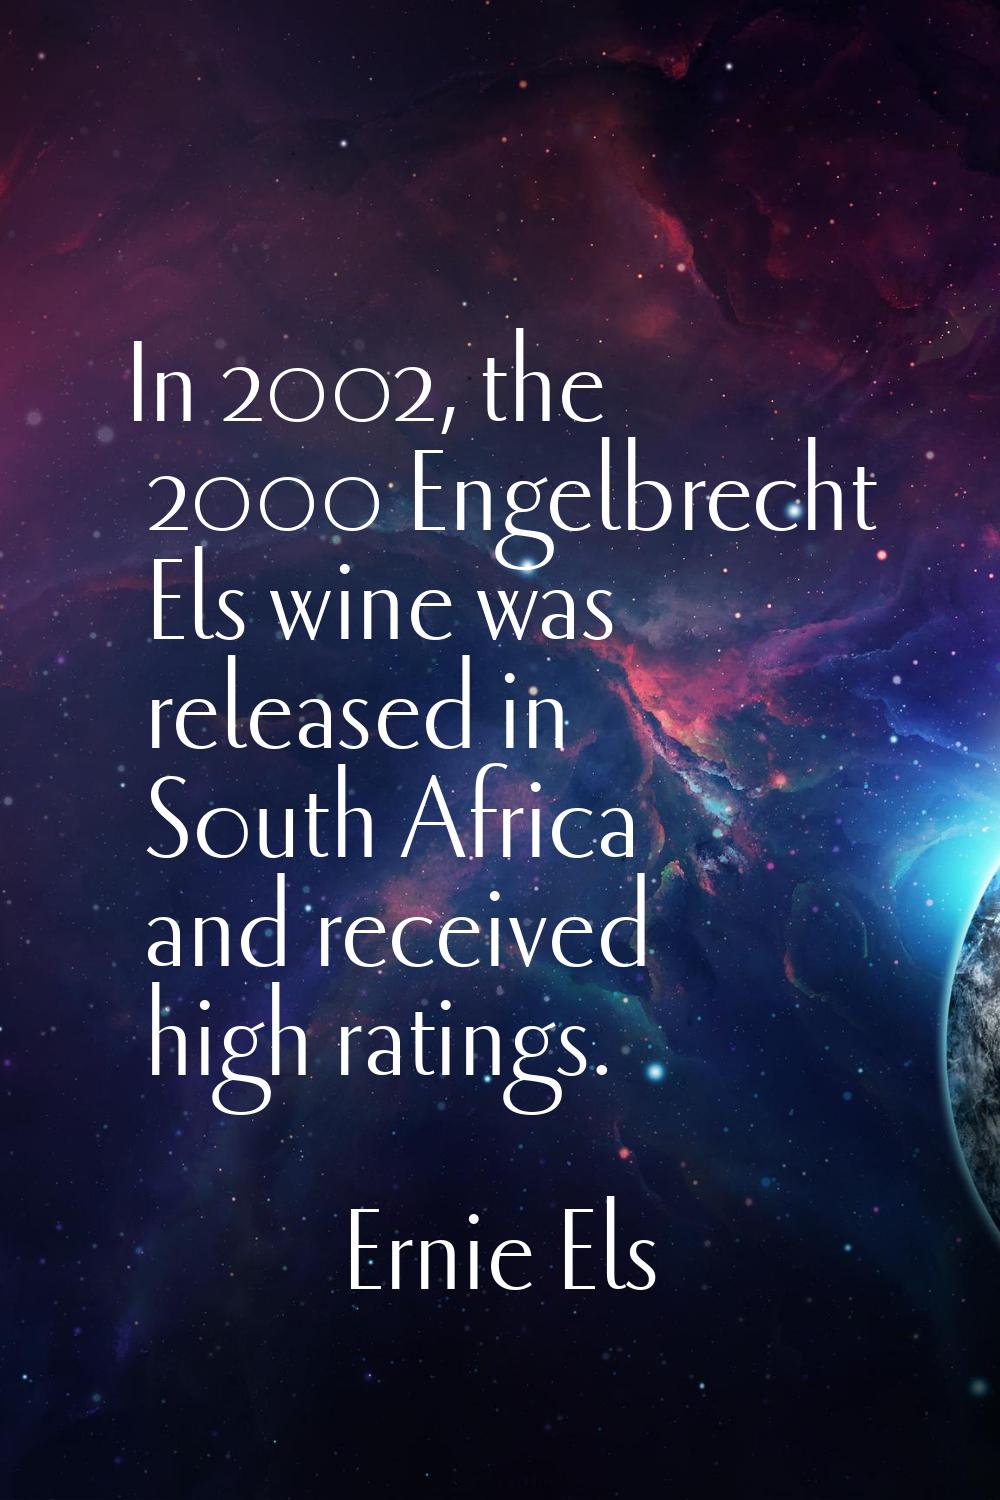 In 2002, the 2000 Engelbrecht Els wine was released in South Africa and received high ratings.